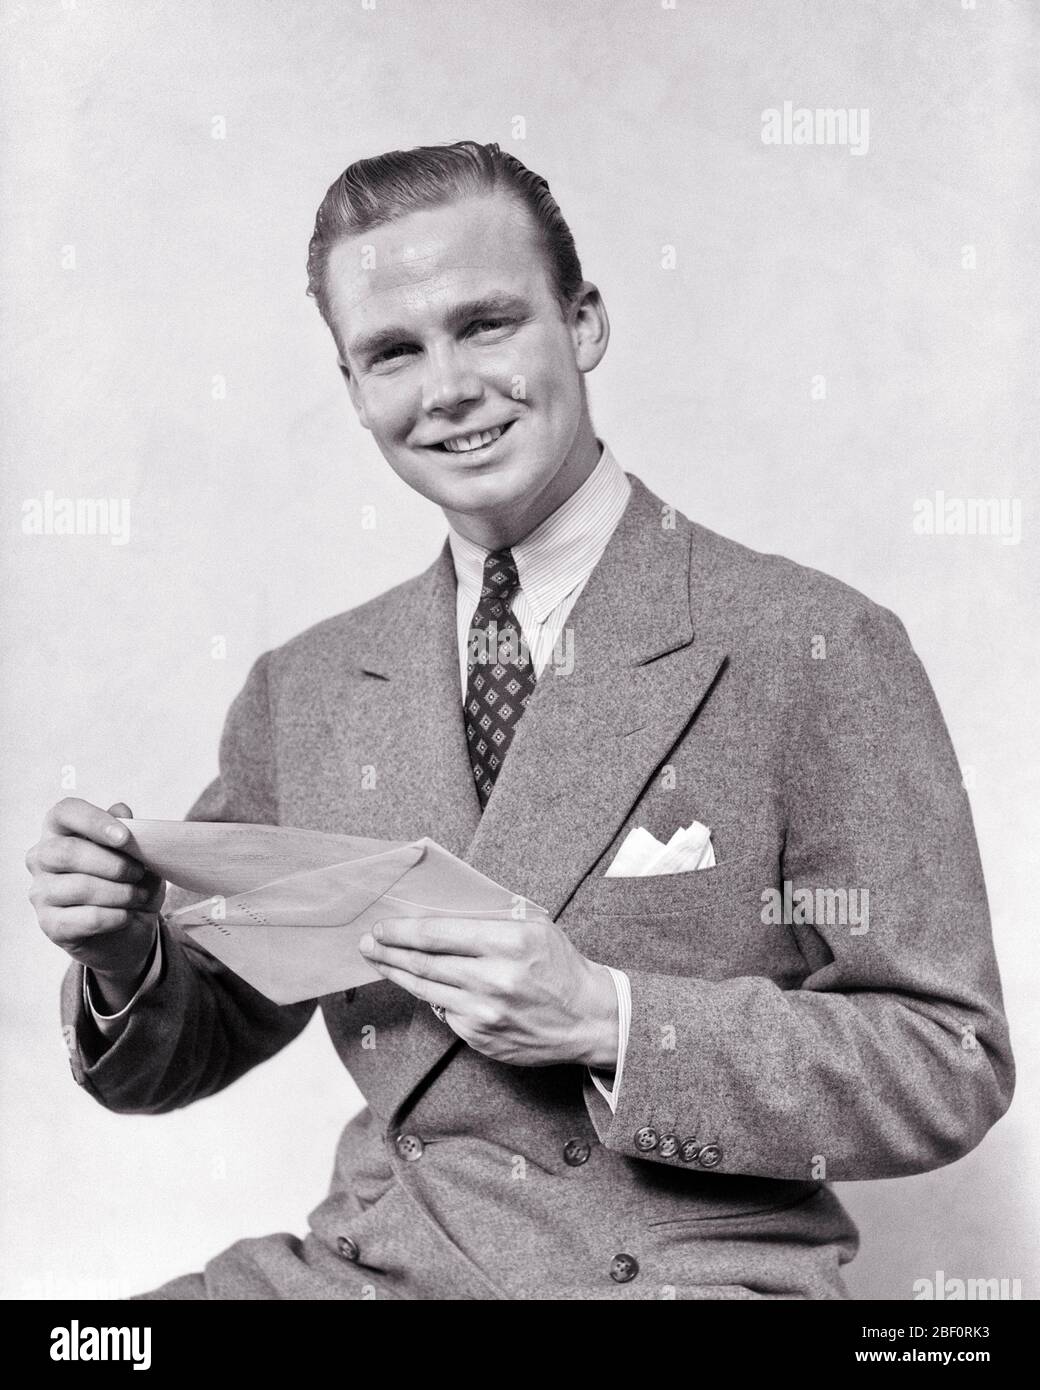 1930s SMILING MAN HOLDING CHECK LETTER AND OPEN ENVELOPE WEARING DOUBLE BREASTED SUIT LOOKING AT CAMERA - s8182 HAR001 HARS JOY LIFESTYLE SATISFACTION STUDIO SHOT HEALTHINESS COPY SPACE HALF-LENGTH PERSONS MALES B&W EYE CONTACT SUIT AND TIE HAPPINESS CHEERFUL CUSTOMER SERVICE AND GOOD NEWS OCCUPATIONS PAYMENT SMILES UPSCALE AFFLUENT JOYFUL STYLISH BREASTED WELL-TO-DO YOUNG ADULT MAN BLACK AND WHITE CAUCASIAN ETHNICITY HAR001 OLD FASHIONED Stock Photo